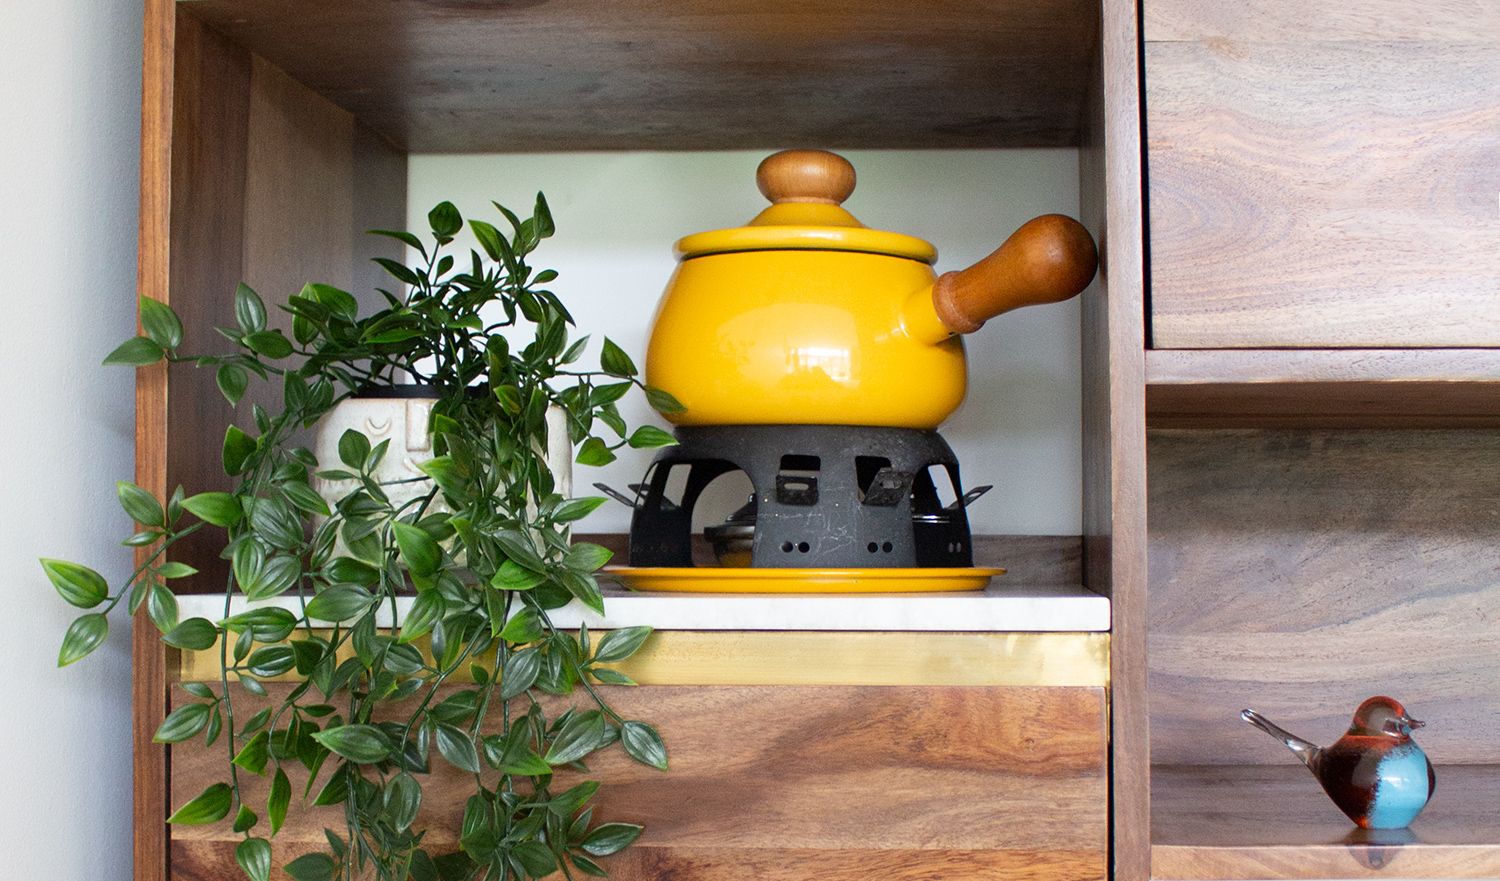 A close up of the walnut shelf unit, styled with plants and a yellow fondue set.